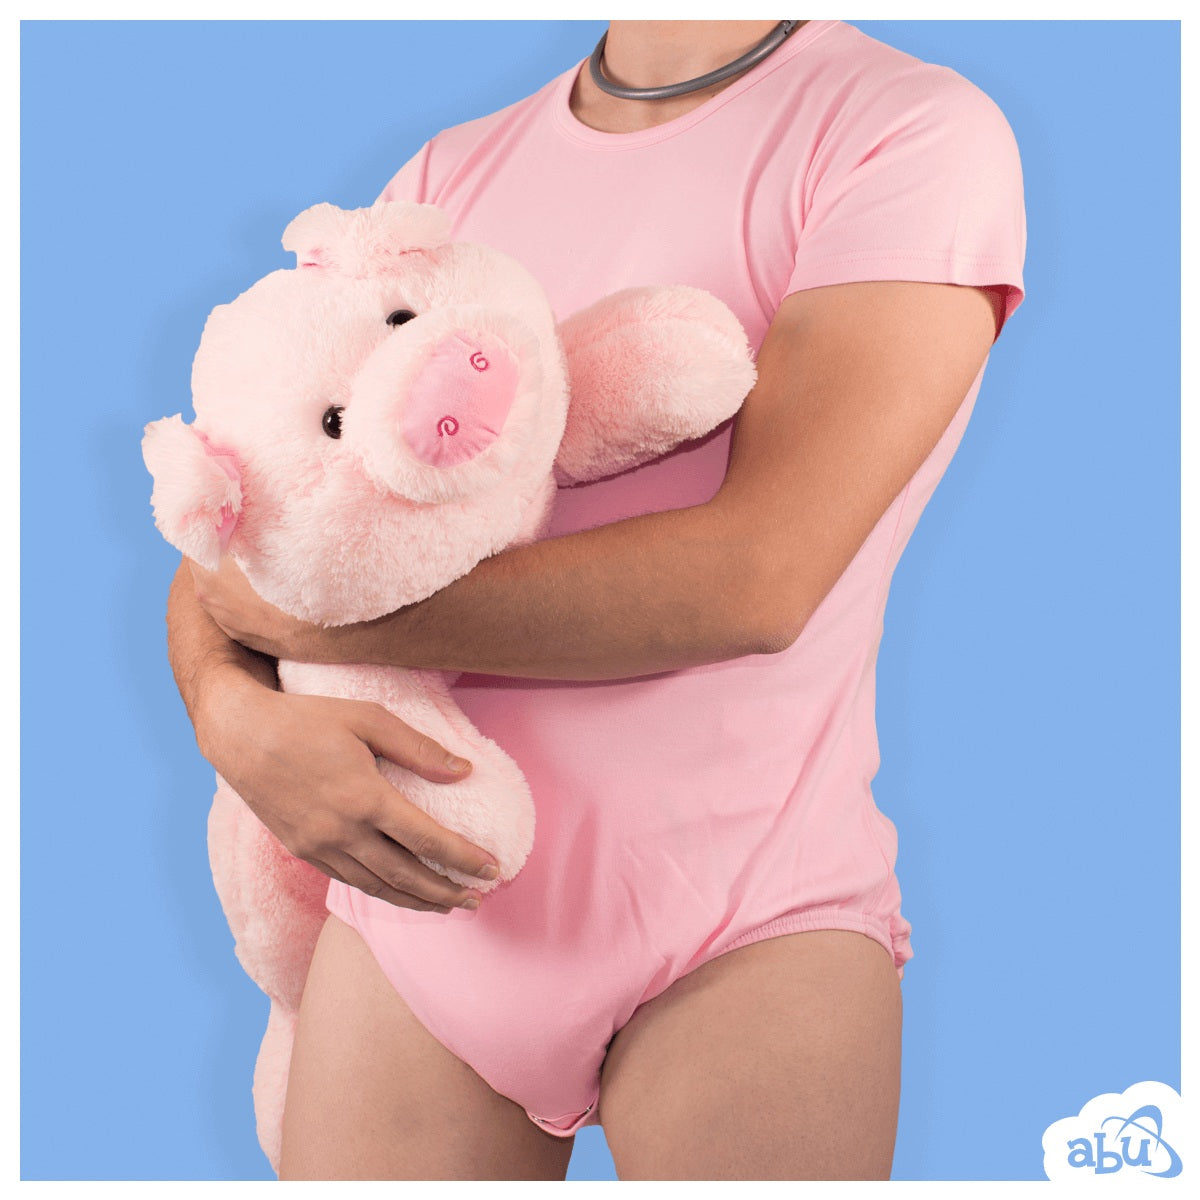 Front view of model wearing baby pink diapersuit with disposable diaper worn underneath and holding a stuffed pig